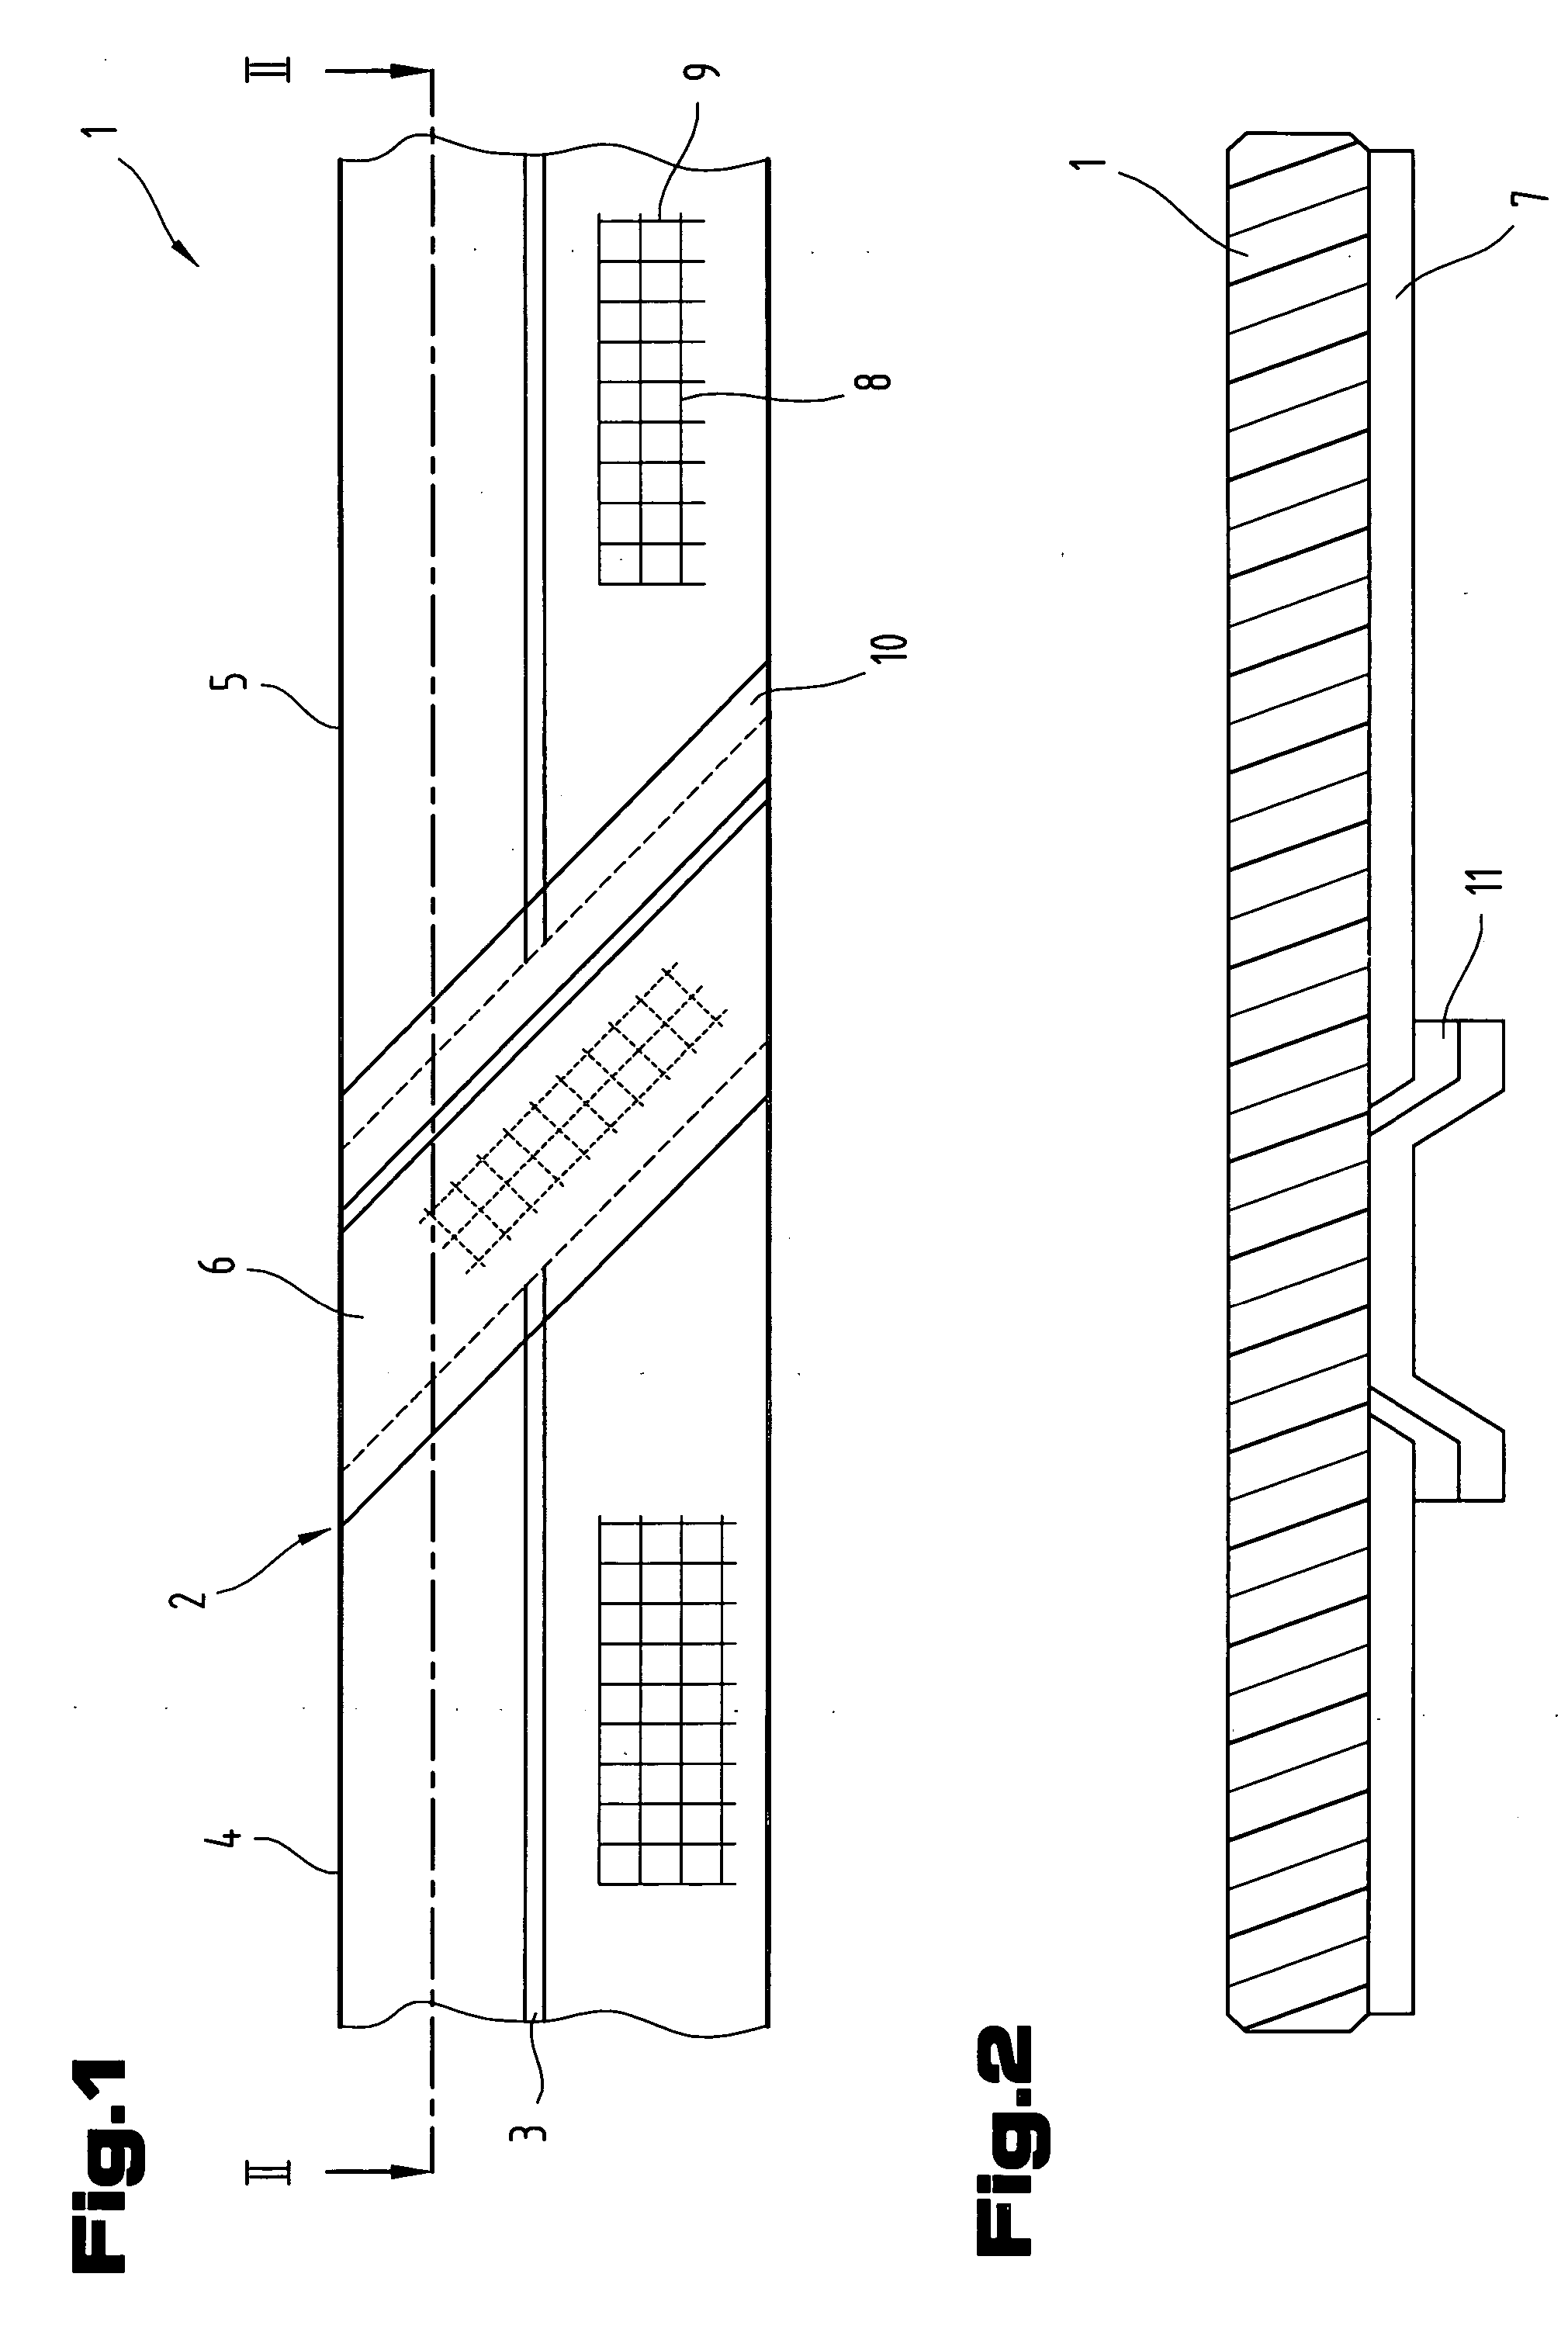 Splice construction for elongate sections